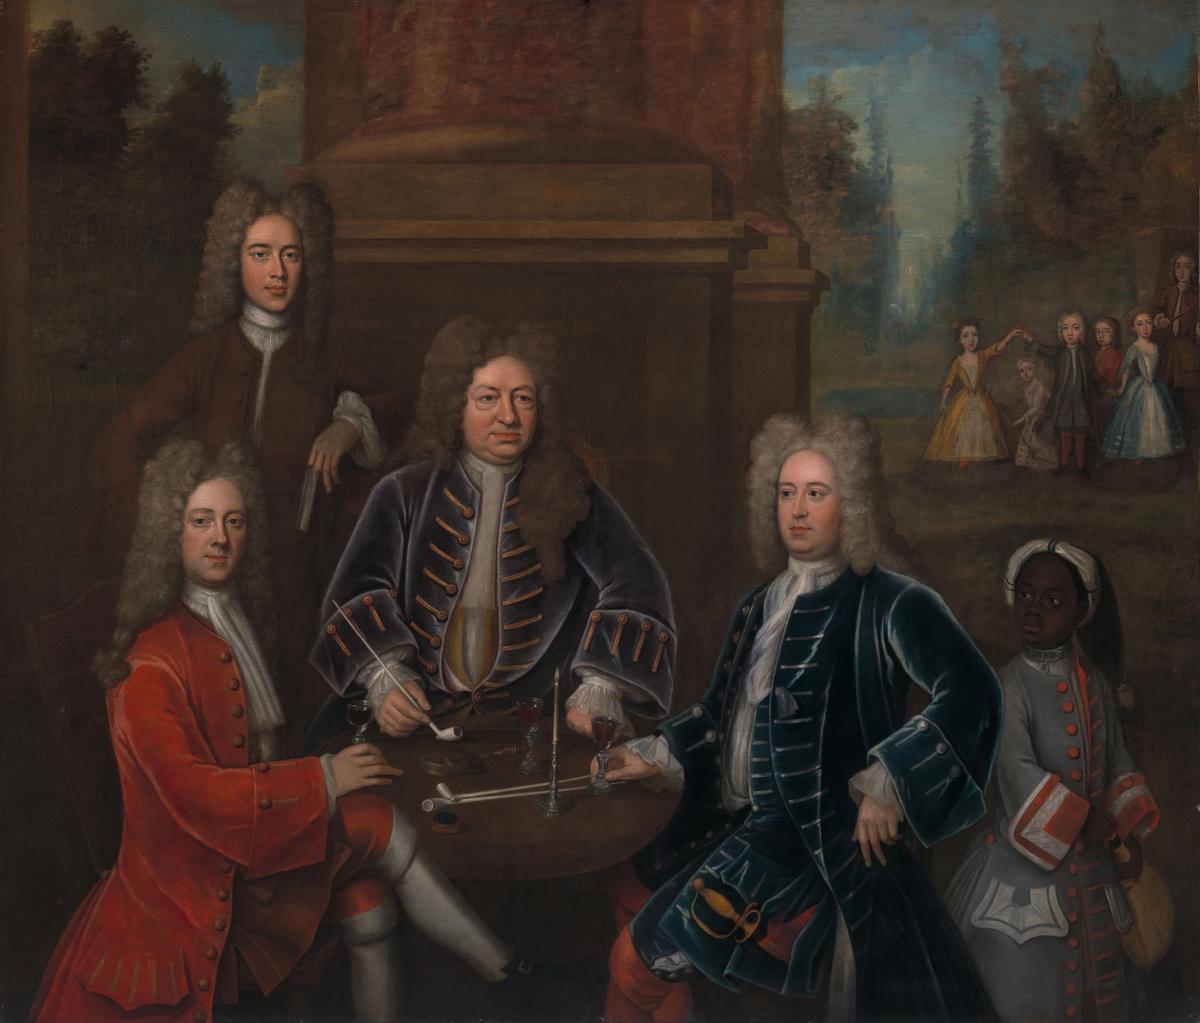 A portrait of Elihu Yale with Members of His Family and an Enslaved Child (around 1719), attributed to John Verelst. Courtesy of the Yale Center for British Art